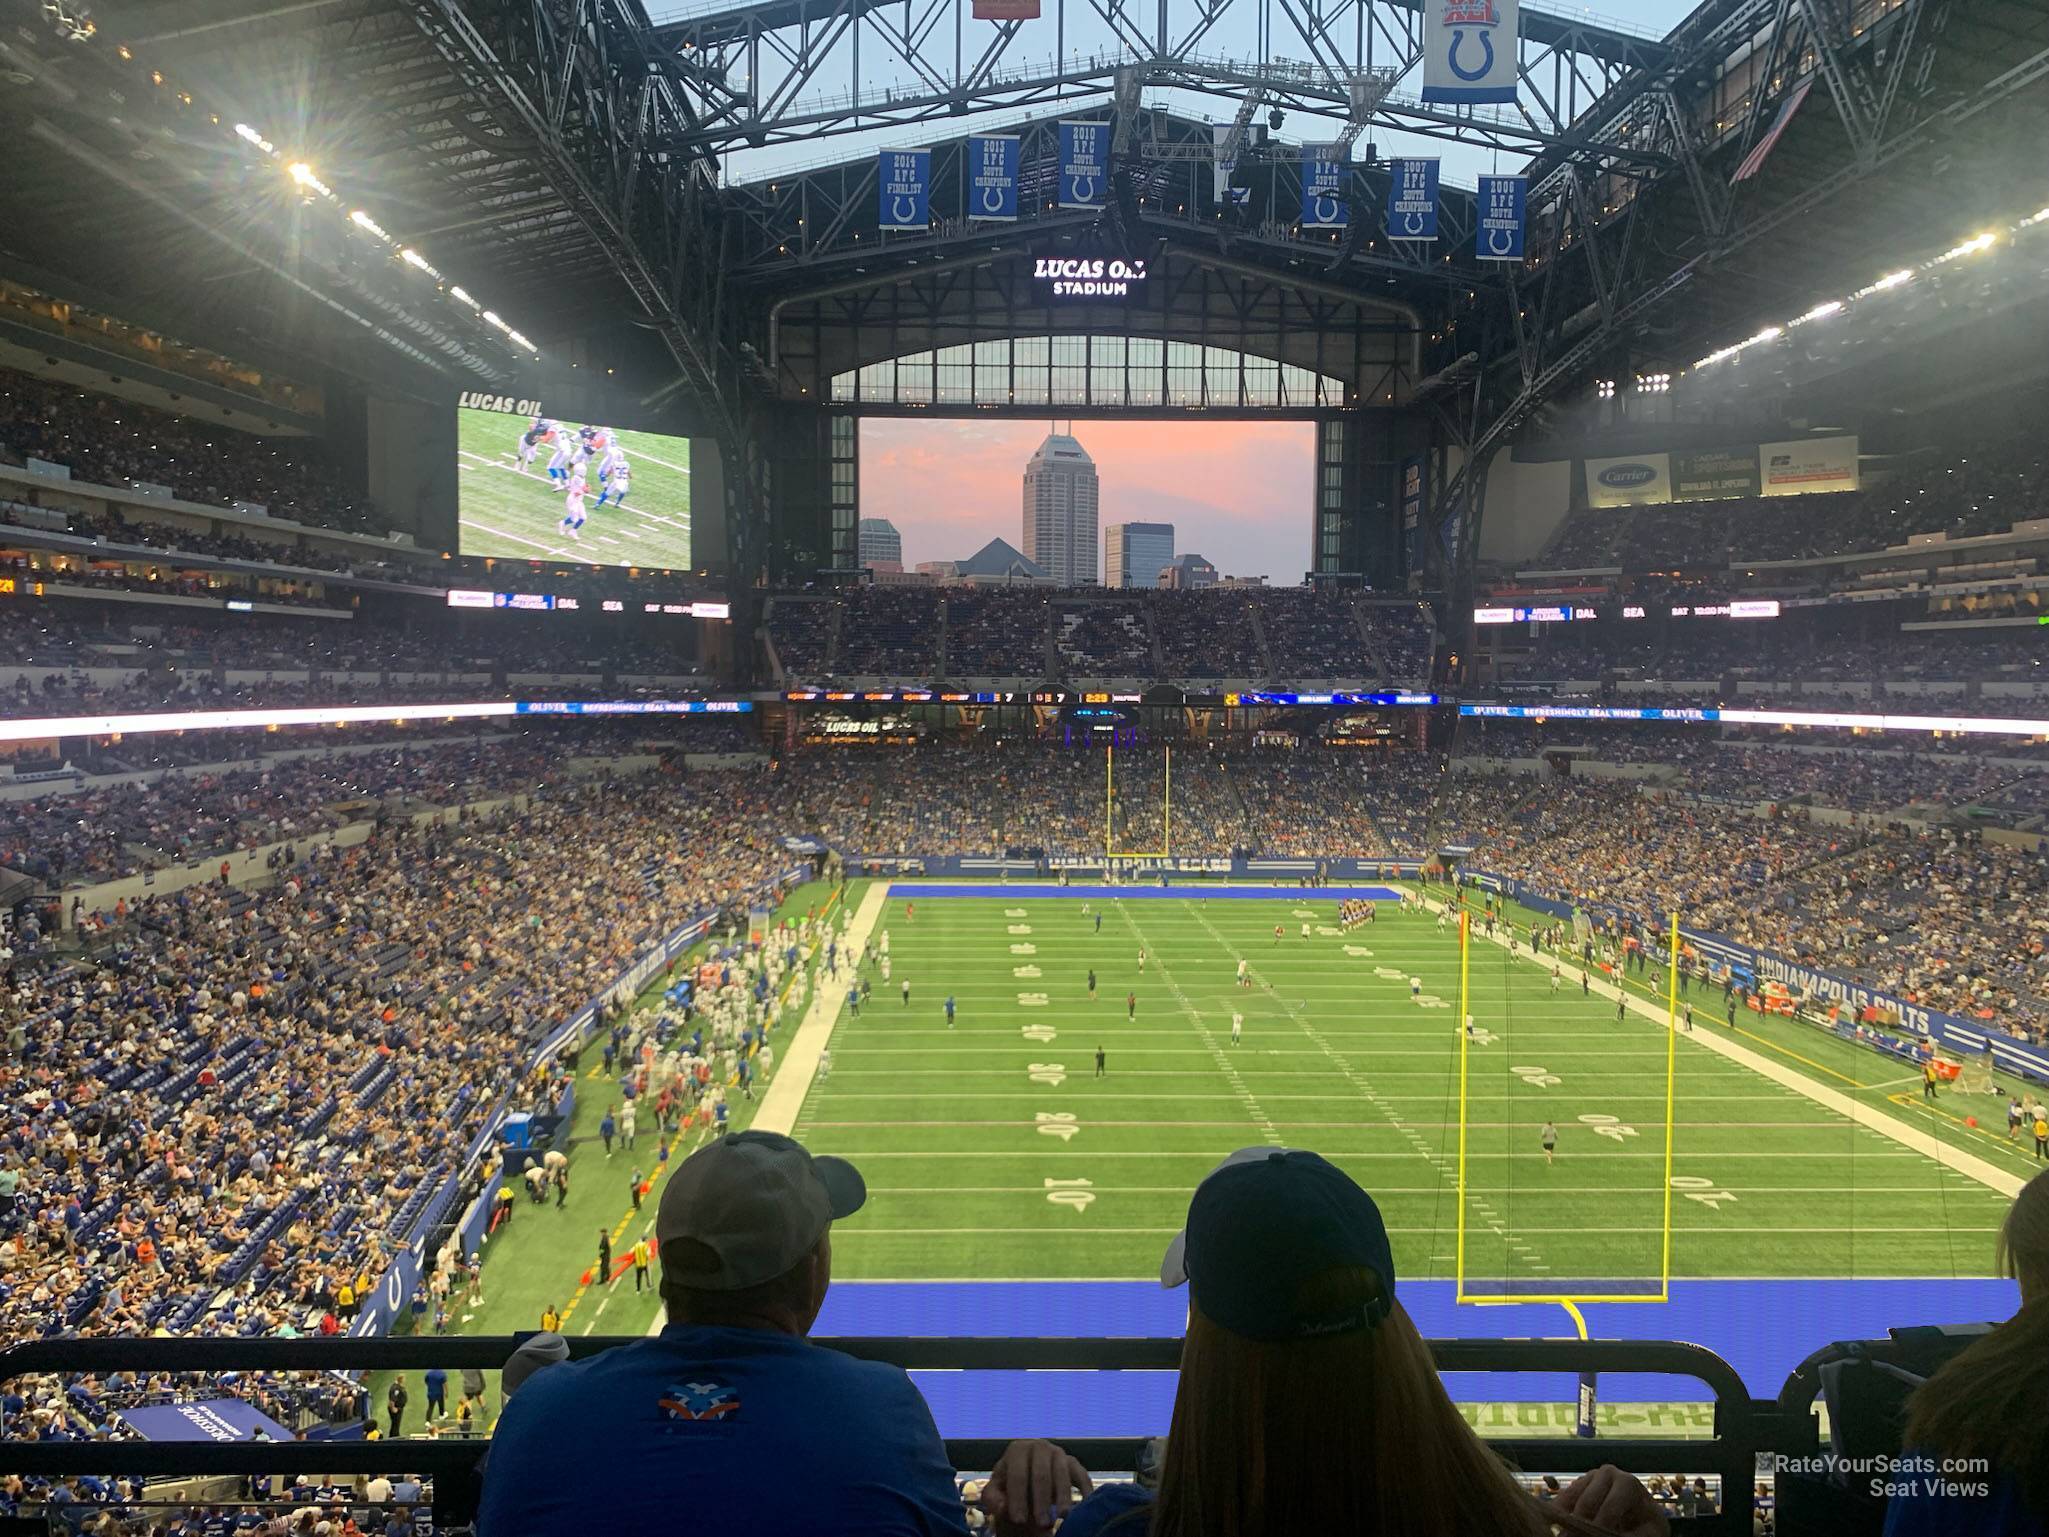 section 328, row 5 seat view  for football - lucas oil stadium